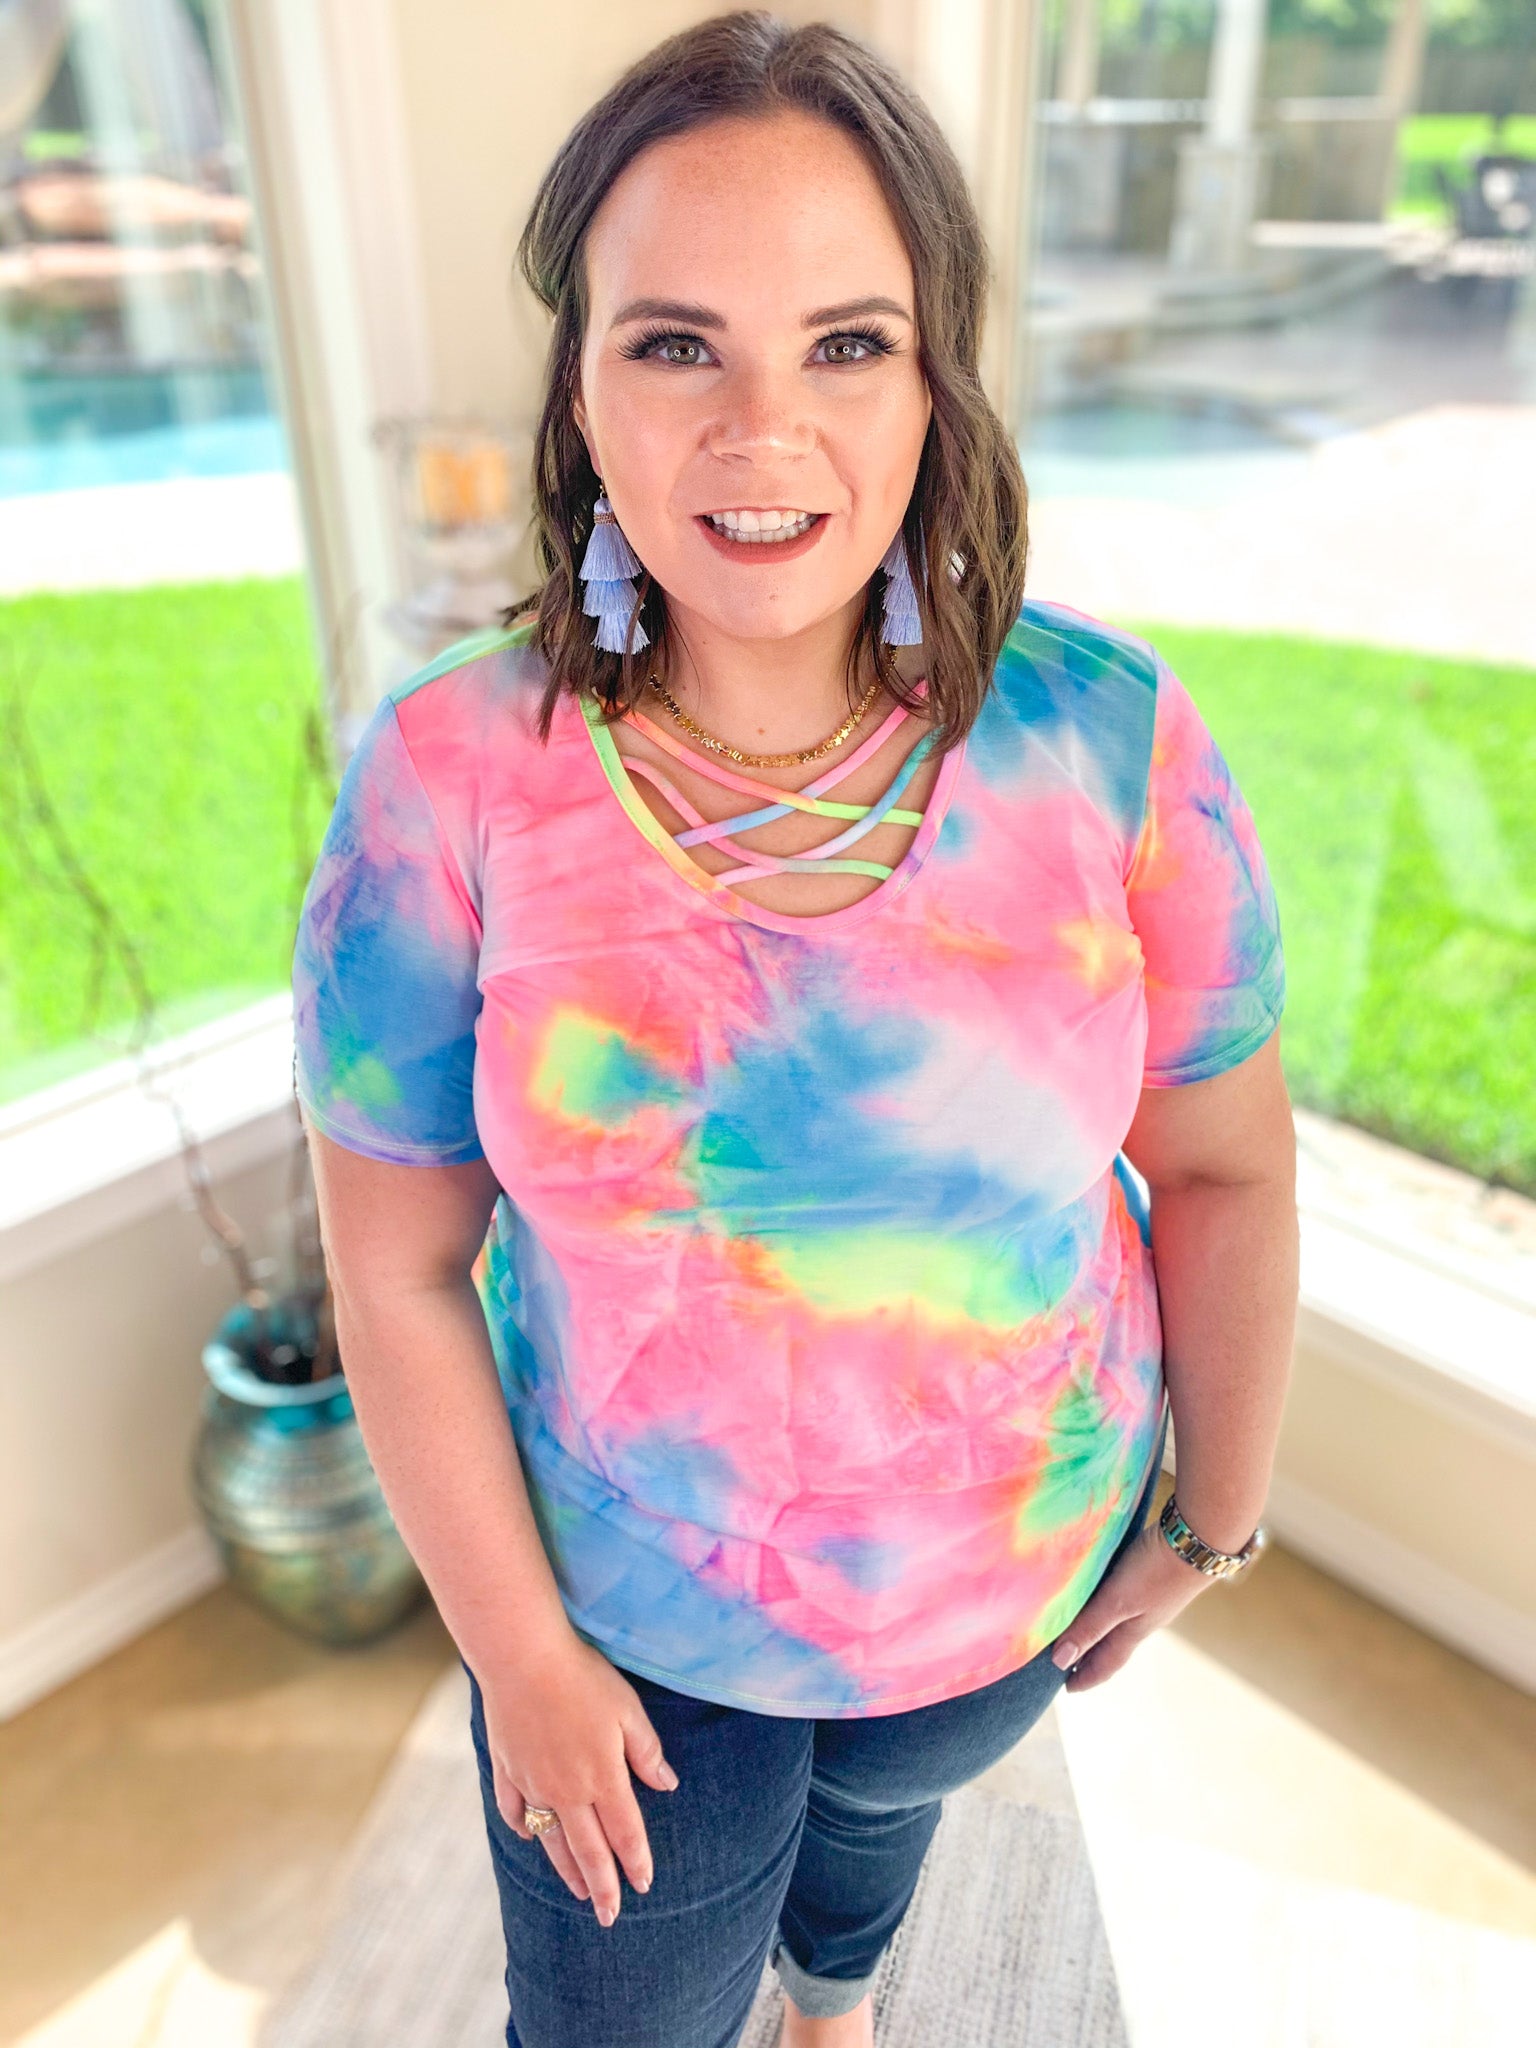 Last Chance Size Small & 3XL | Over the Rainbow Short Sleeve Tie Dye Top with Criss Cross Neck in Yellow, Pink, and Blue - Giddy Up Glamour Boutique